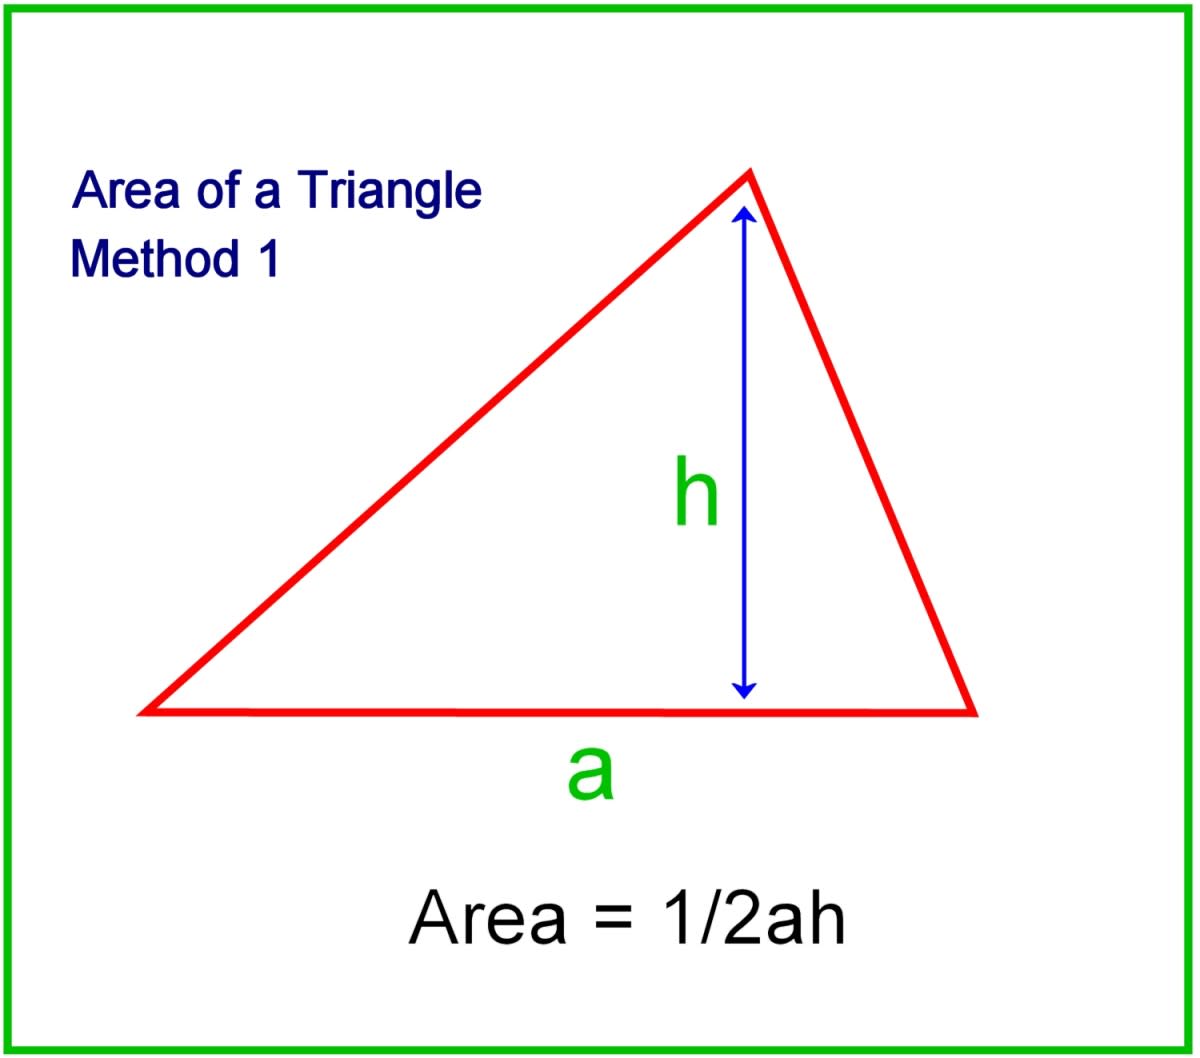 Working out the area of a triangle from the base lengtth and perpendicular height.